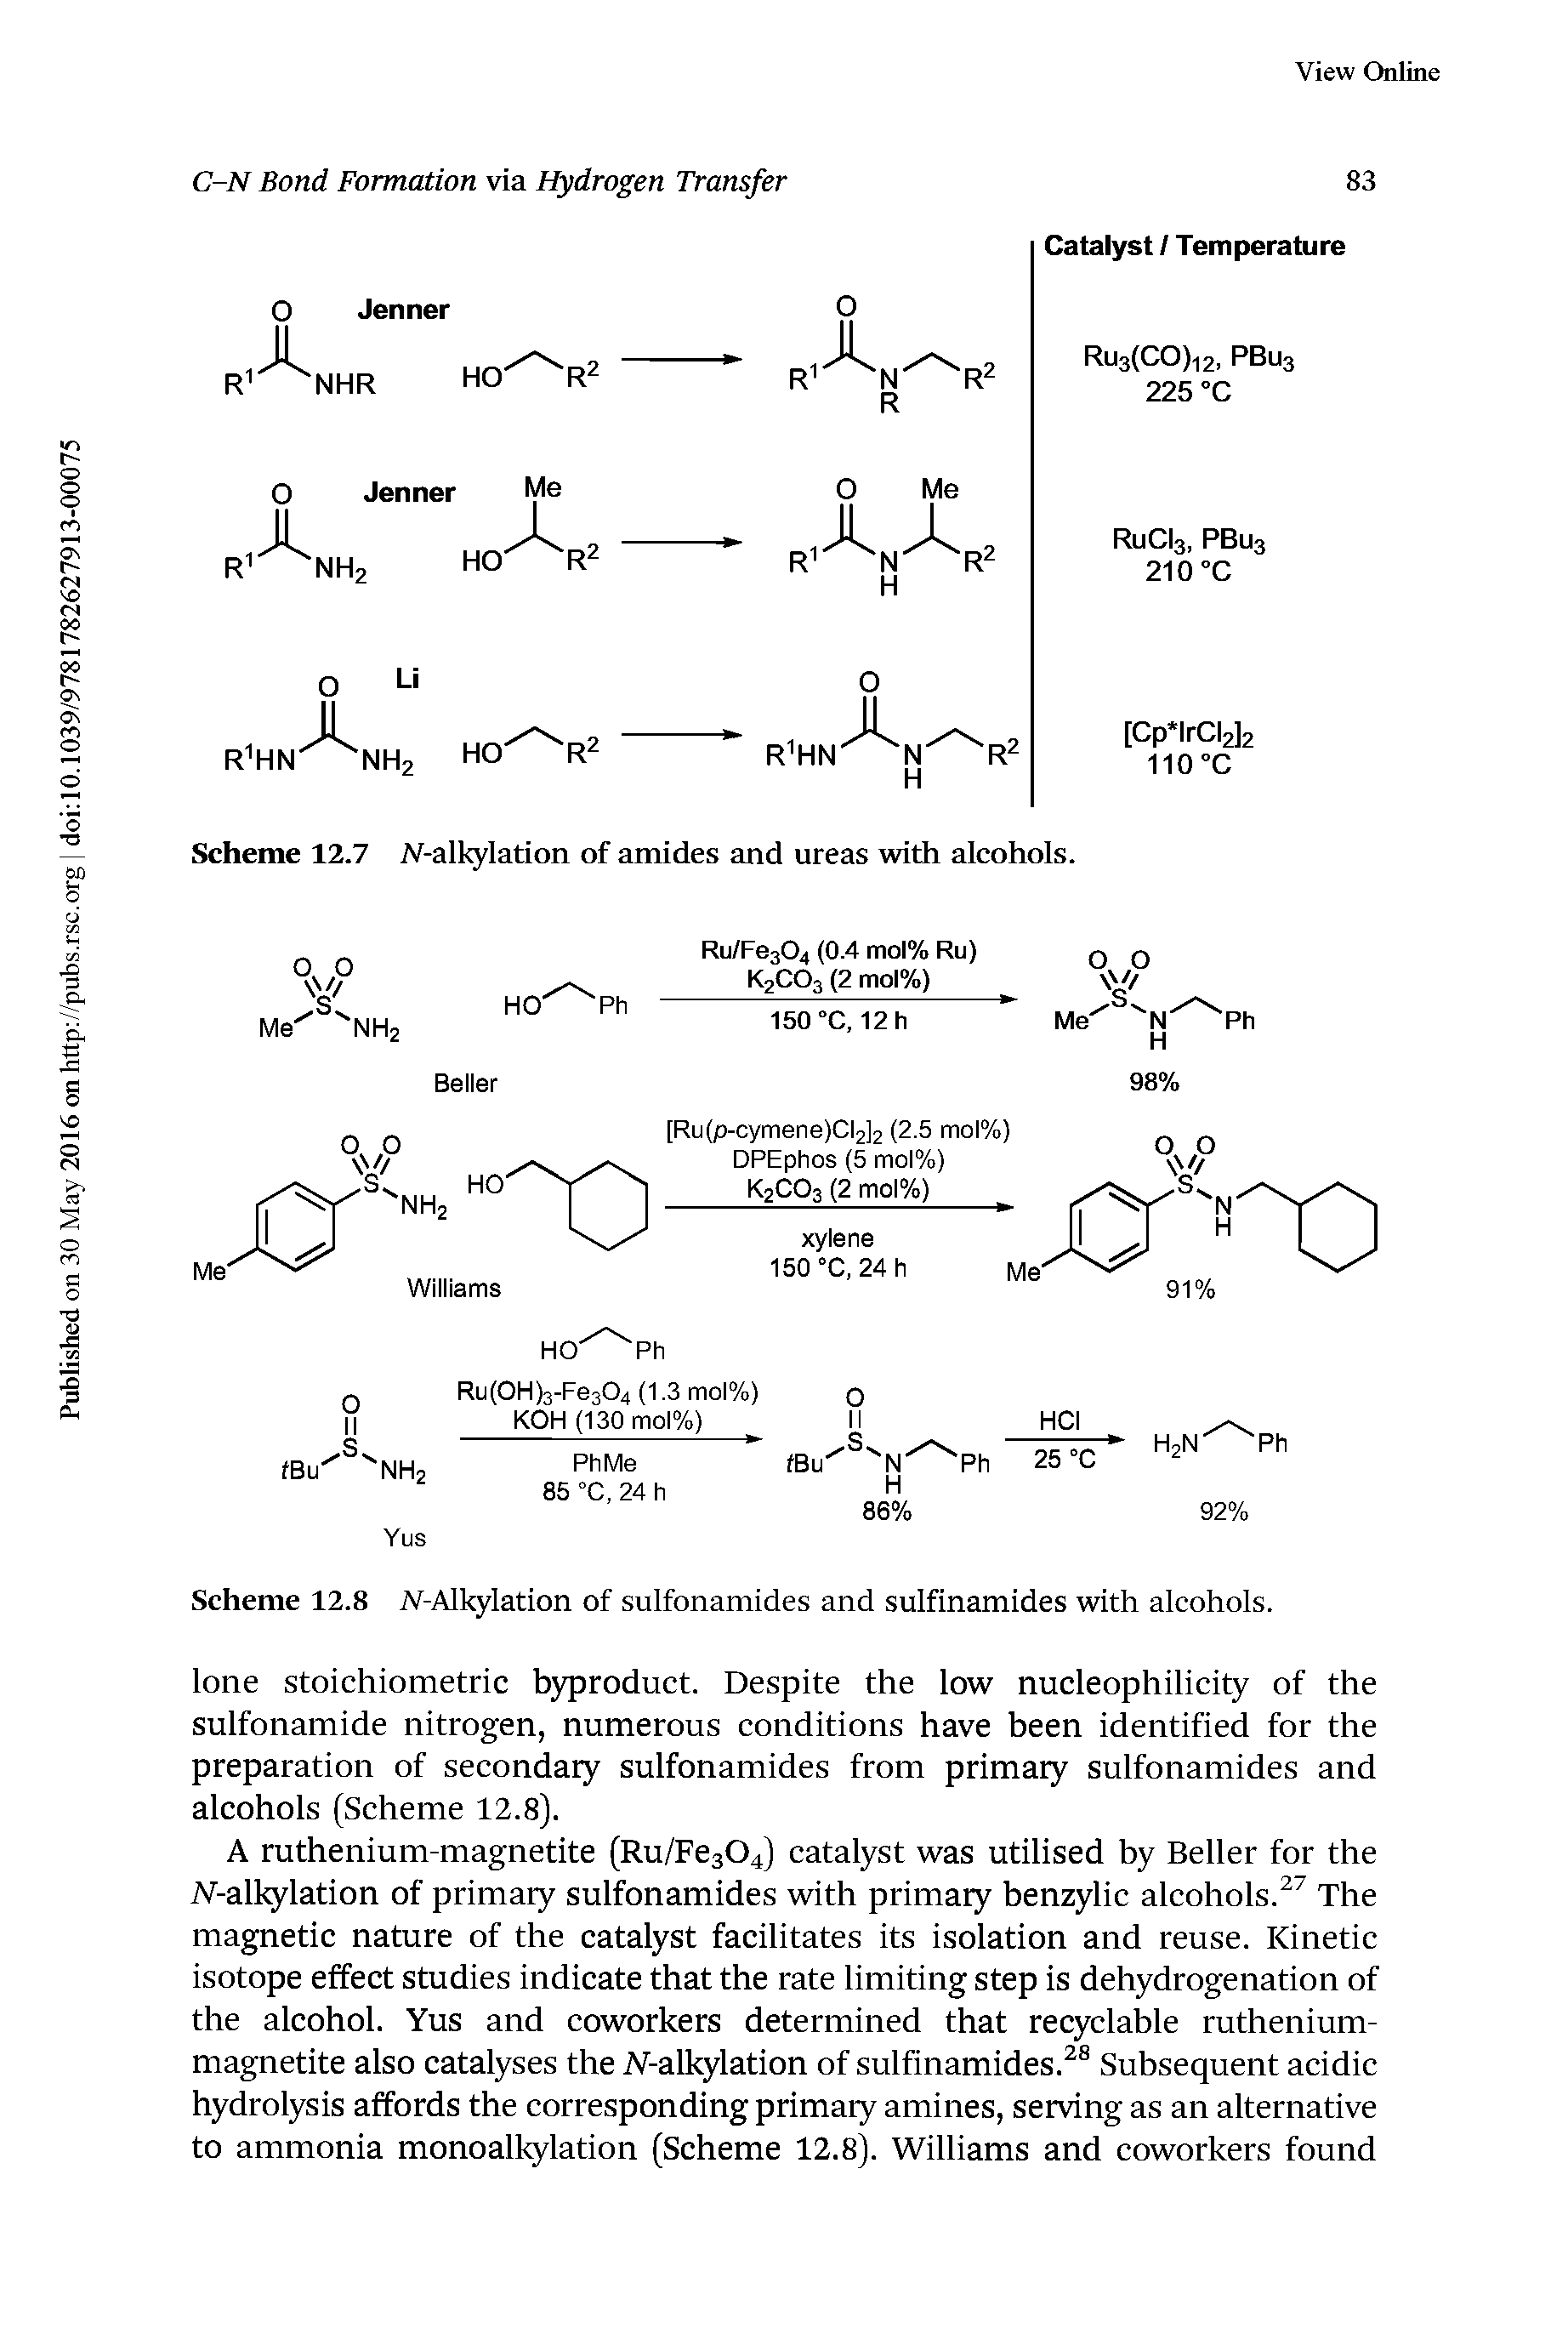 Scheme 12.8 JV-Alkylation of sulfonamides and sulfinamides with alcohols.